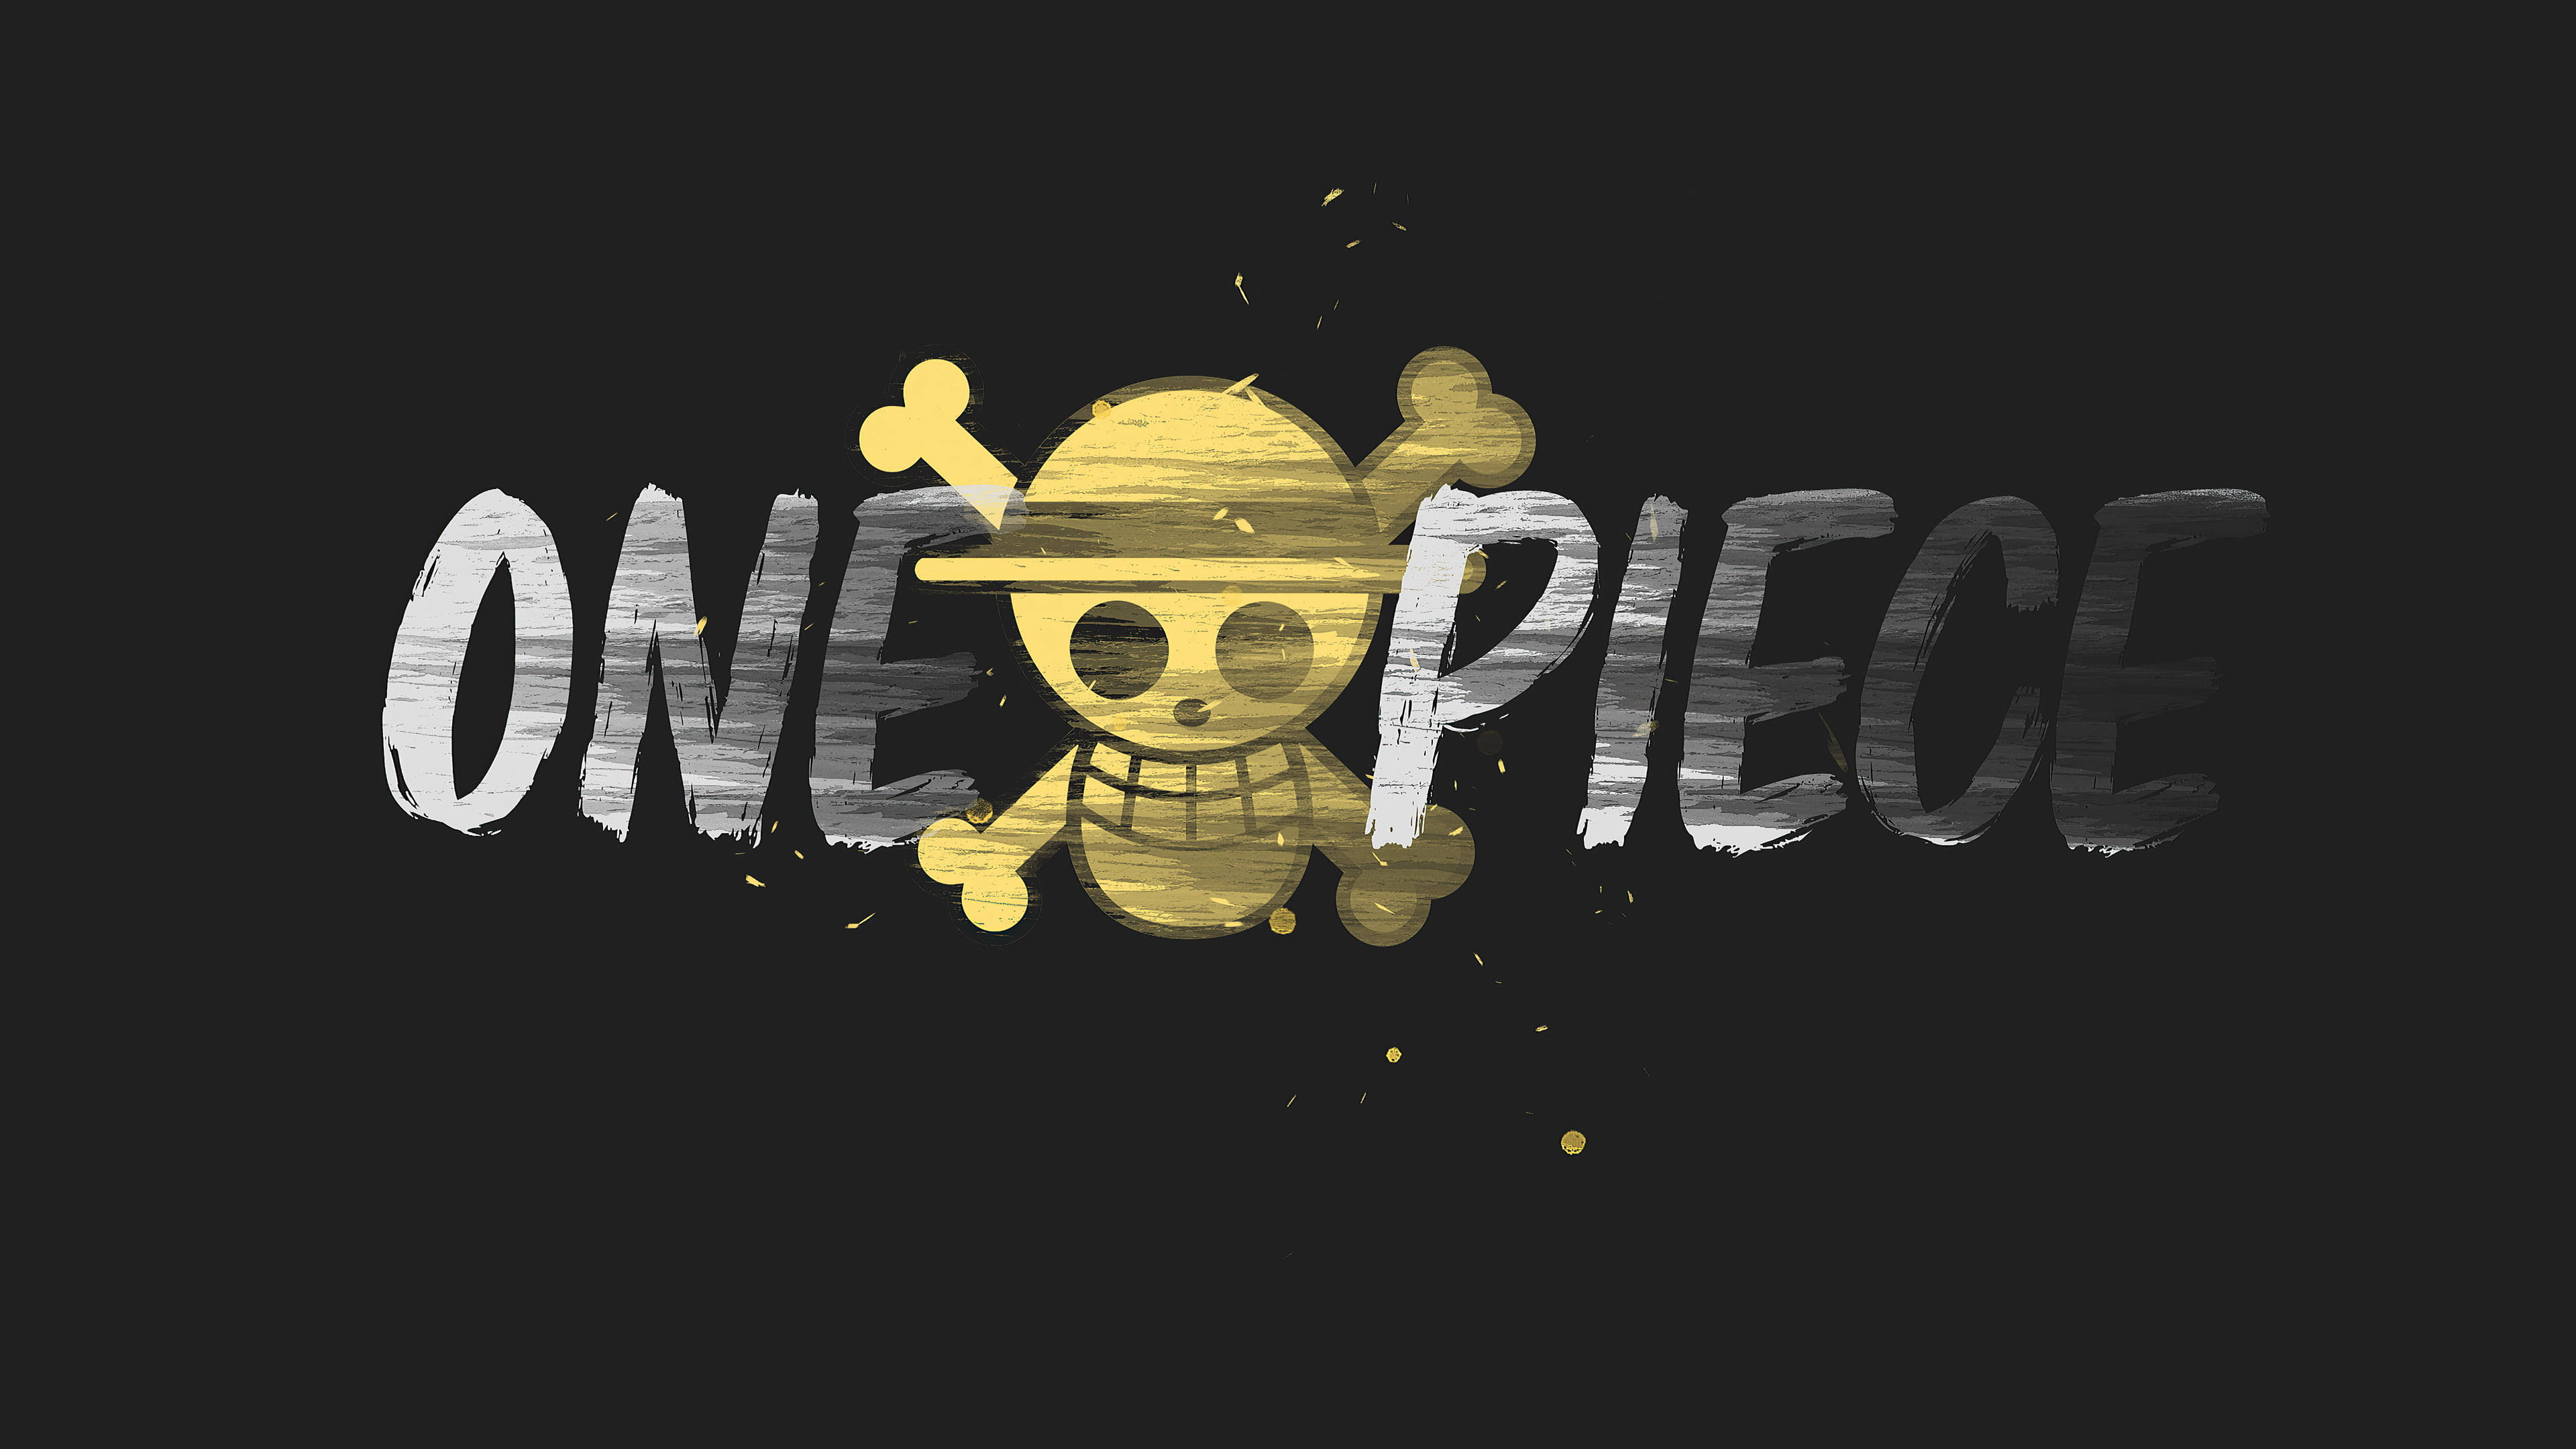 Anime Symbols One Piece Jolly Roger Blurred Effect Wallpaper